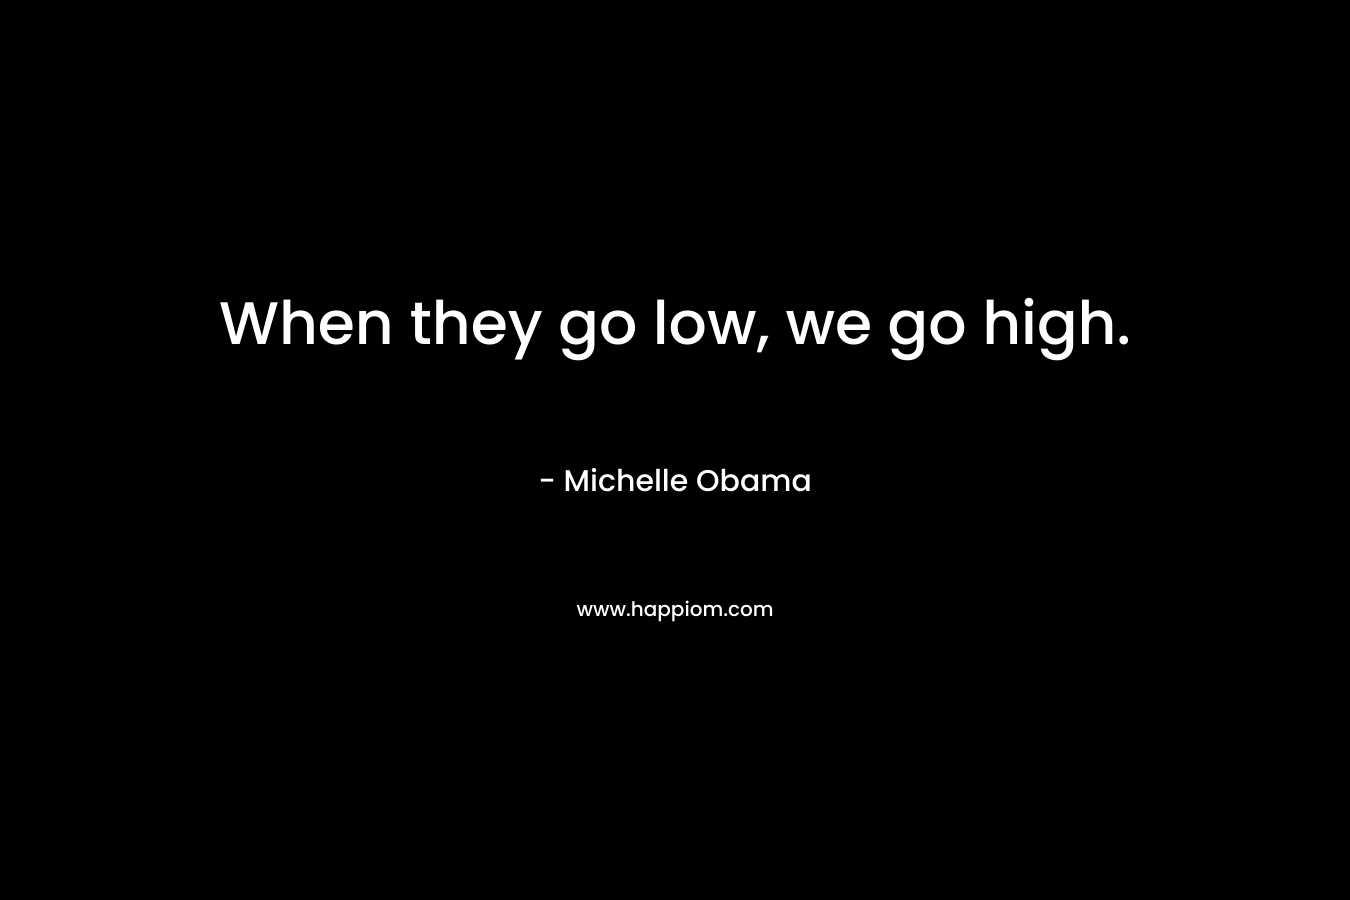 When they go low, we go high. – Michelle Obama